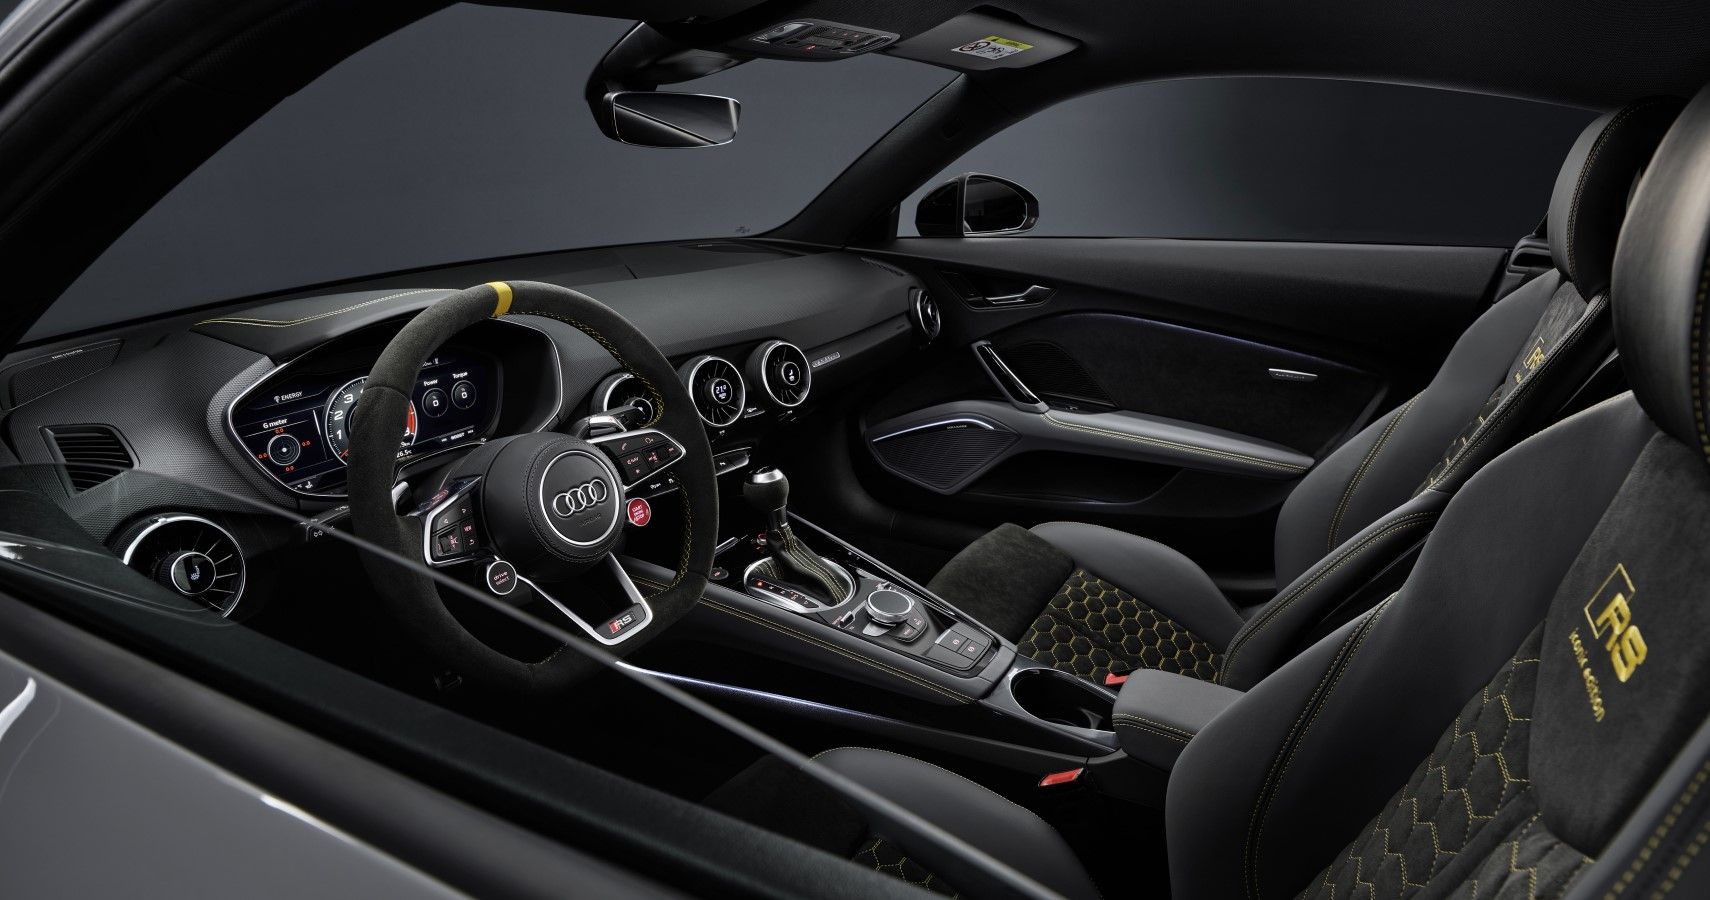 Audi TT RS Coupe Iconic Edition interior view